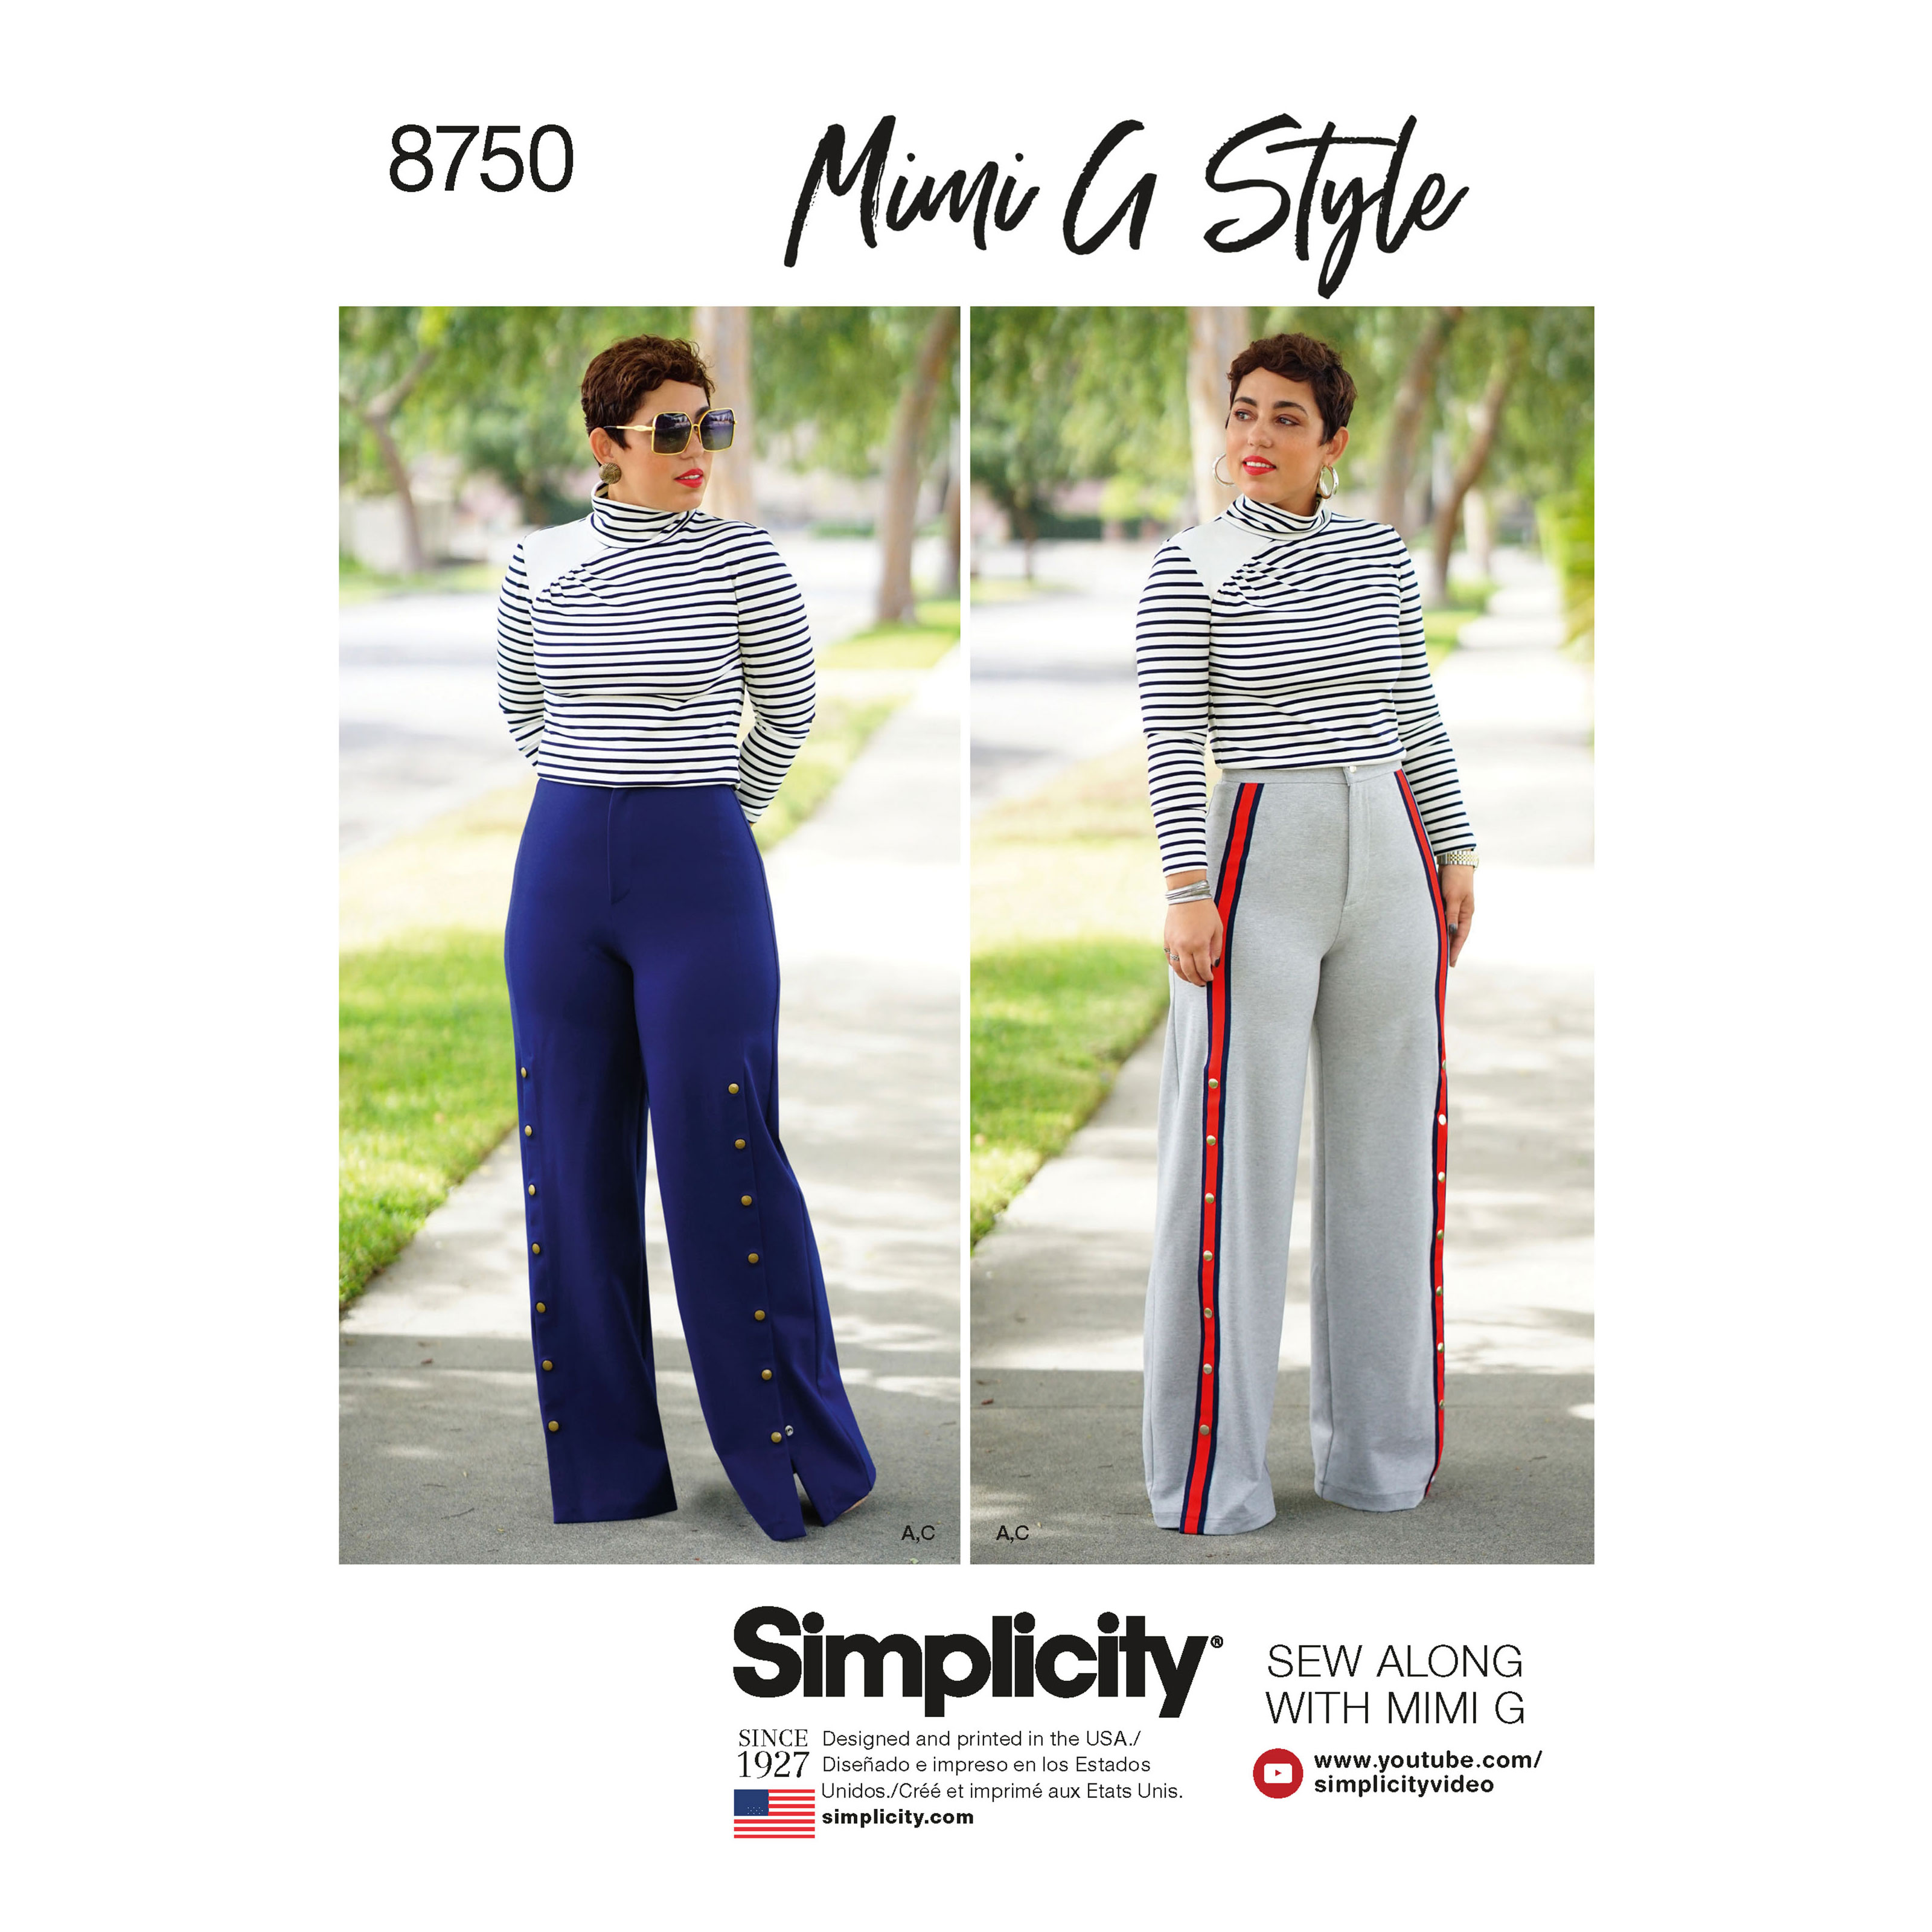 Simplicity U06762A New Look Easy to Sew Misses' Tops, Pants, and Skirts  Sewing Pattern Kit, Code 6762, Sizes XS-XL